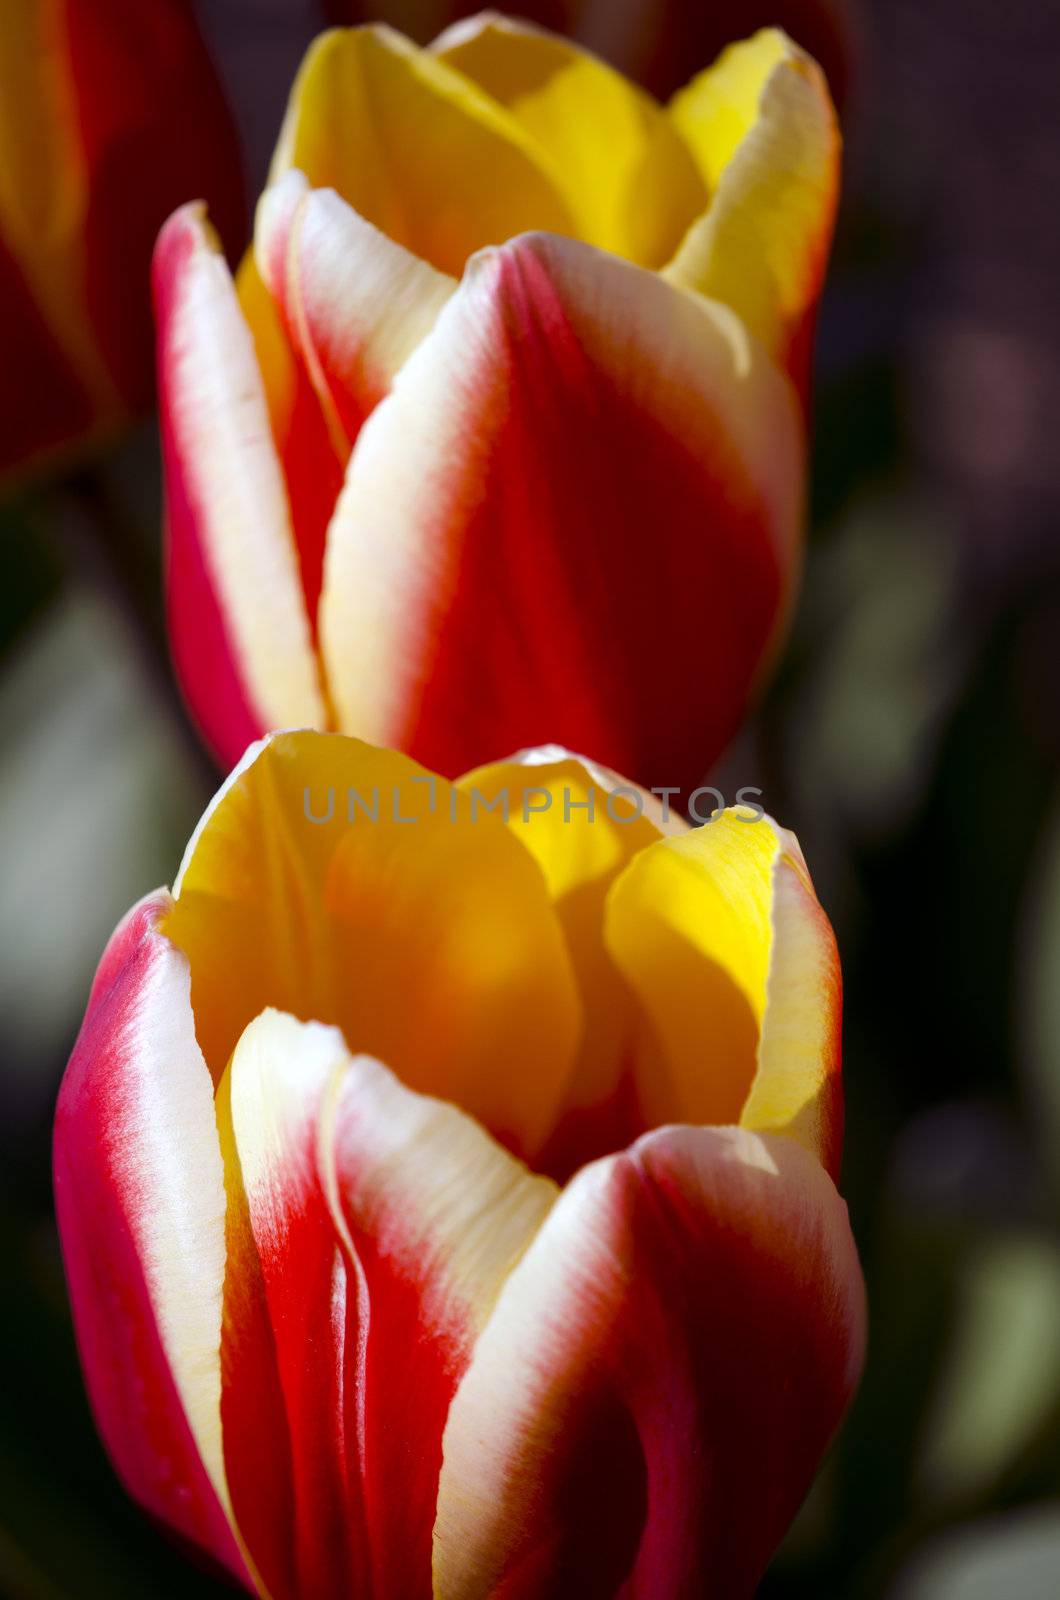 two tullips by seattlephoto